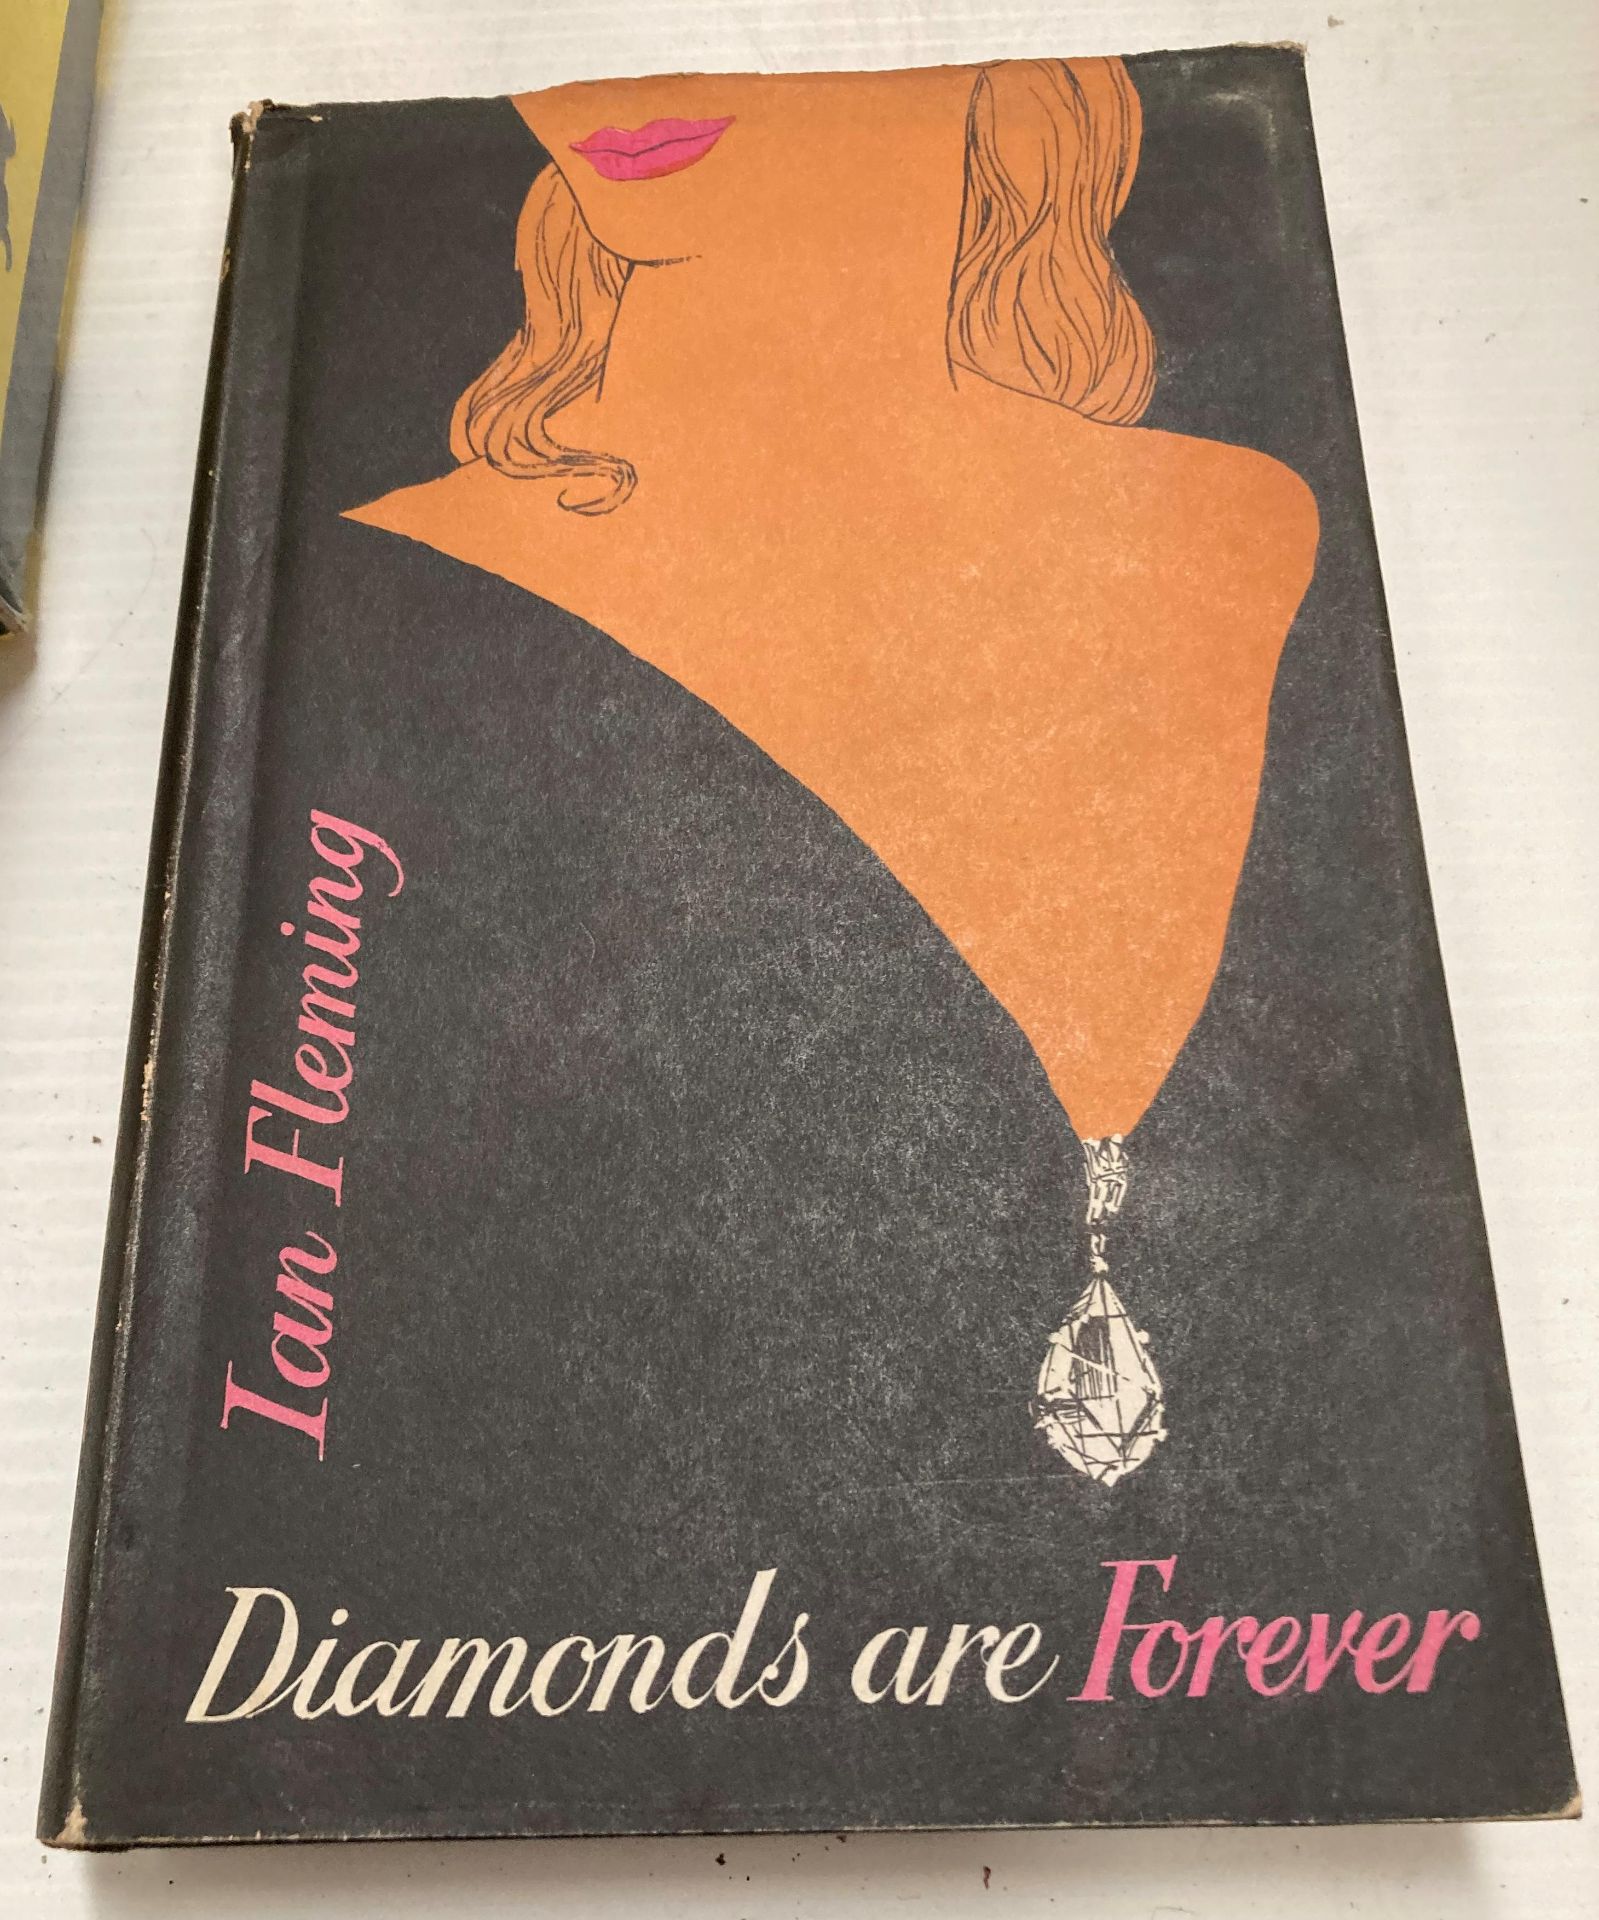 Ian Fleming 'Diamonds are Forever' 1964 Reprint complete with dust cover, Captain W. - Image 2 of 3